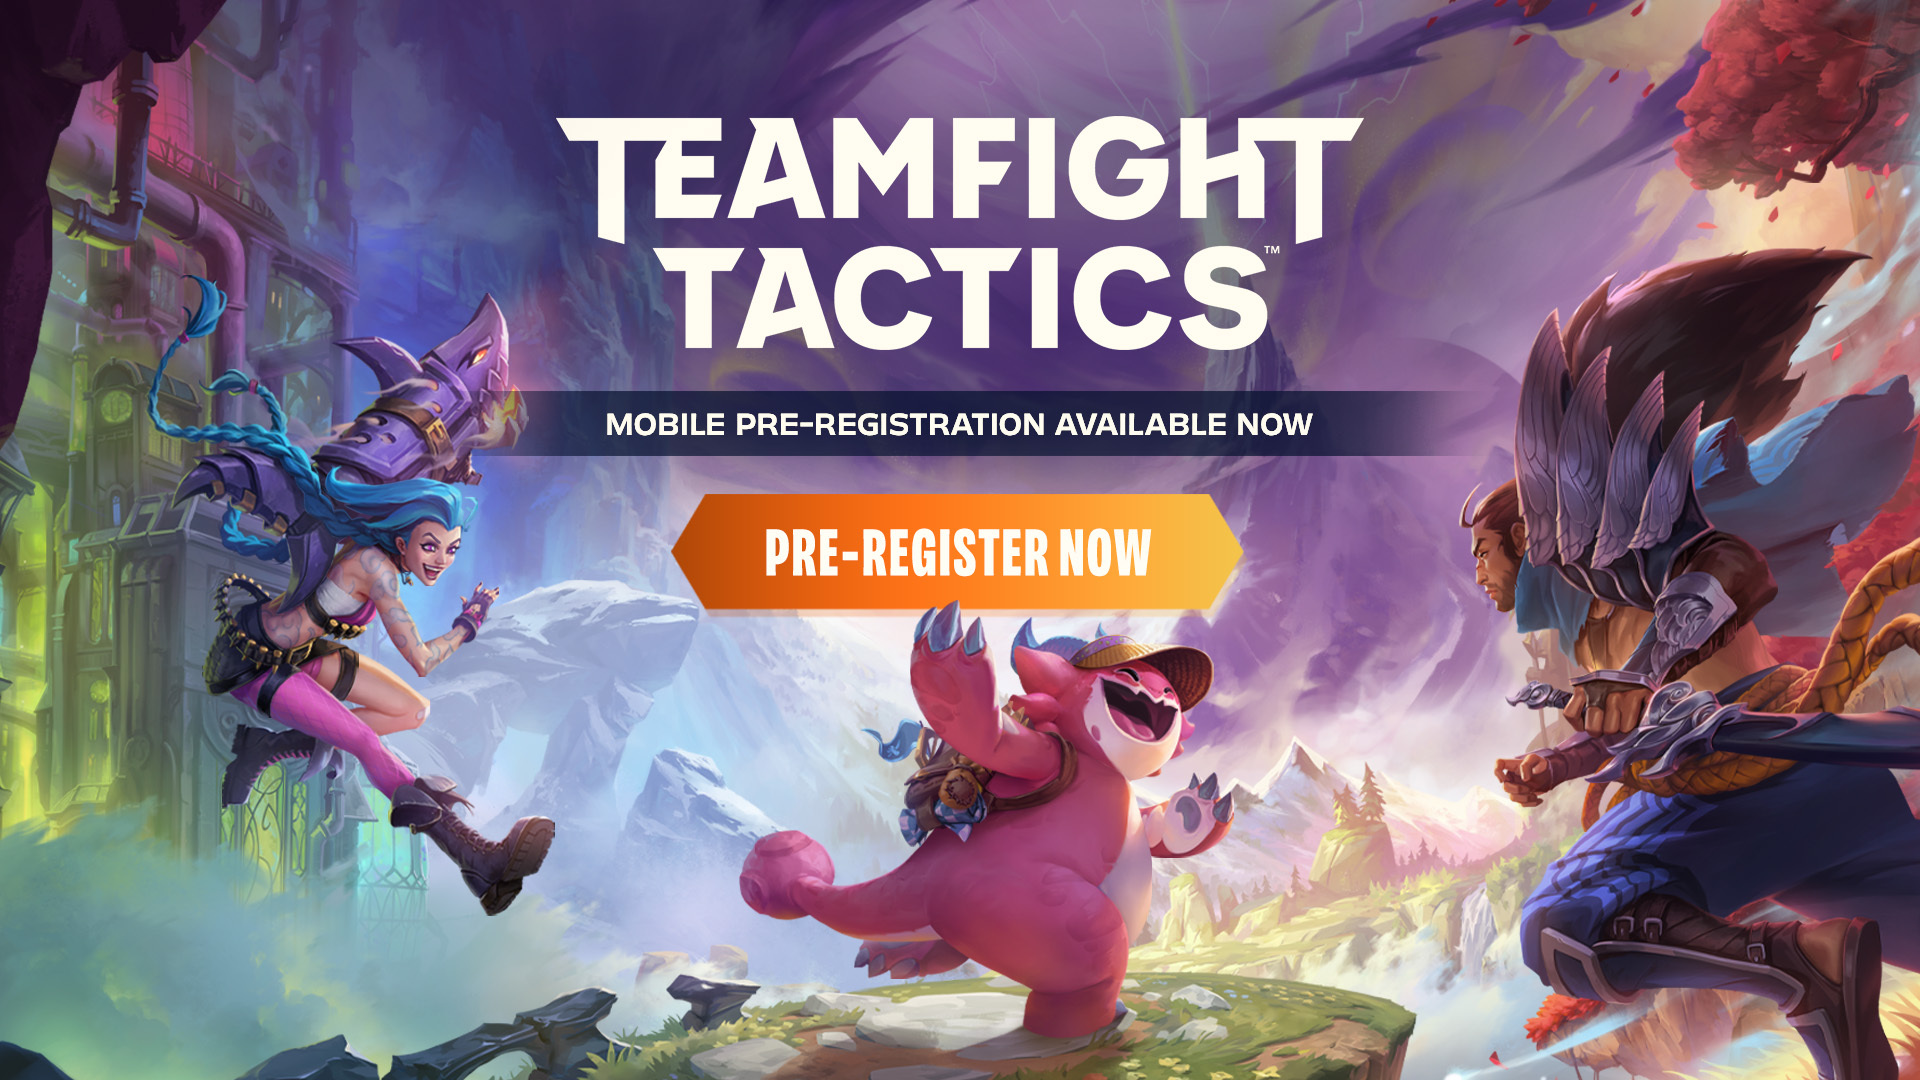 Riot's Biggest PC and Mobile Games Available Soon with Game Pass : r/Games